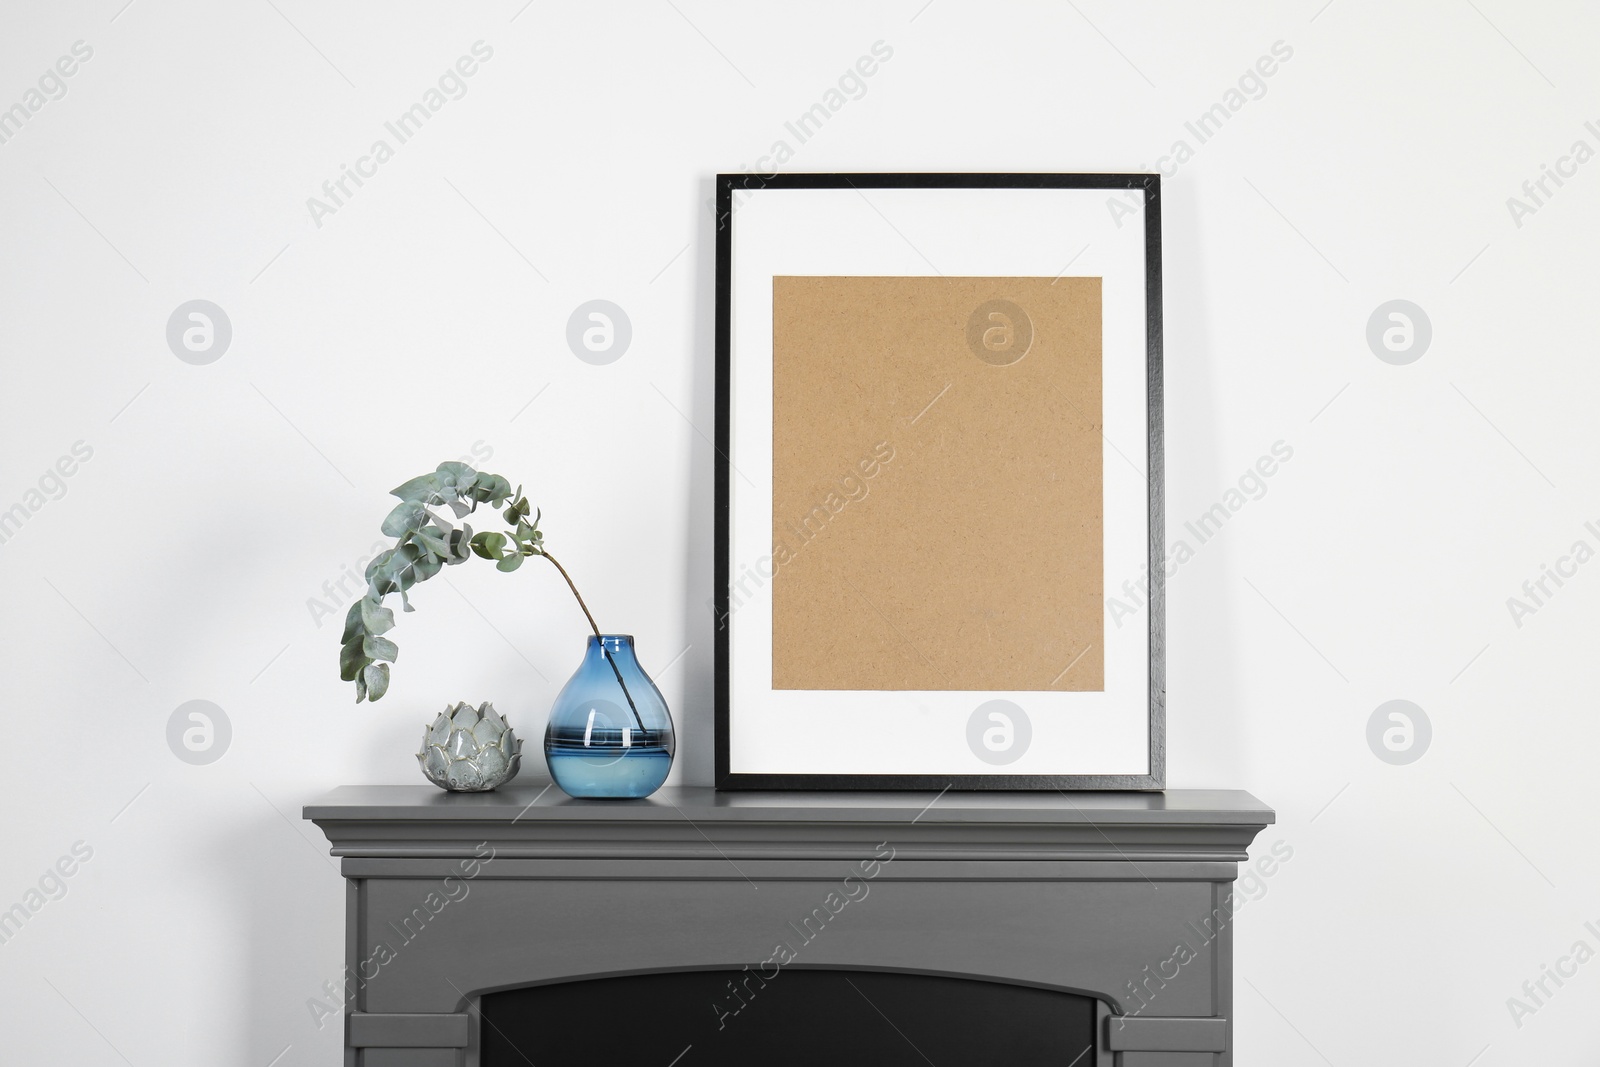 Photo of Empty frame and eucalyptus branch in vase on fireplace near white wall indoors. Interior design